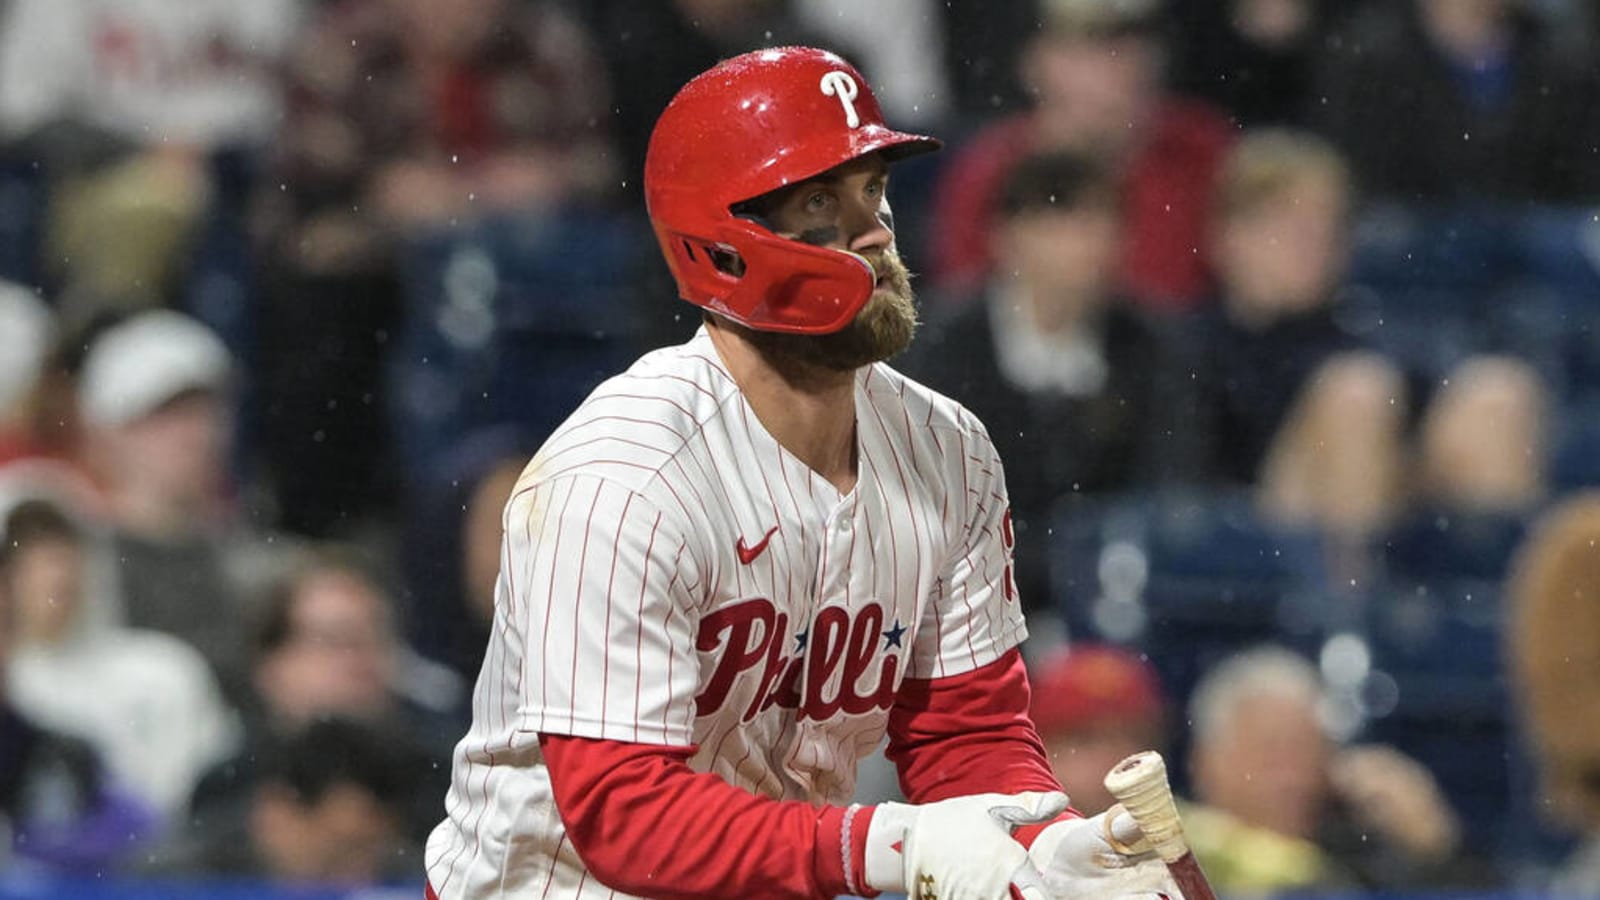 Watch: Bryce Harper gives Mother's Day shoutout after hitting HR